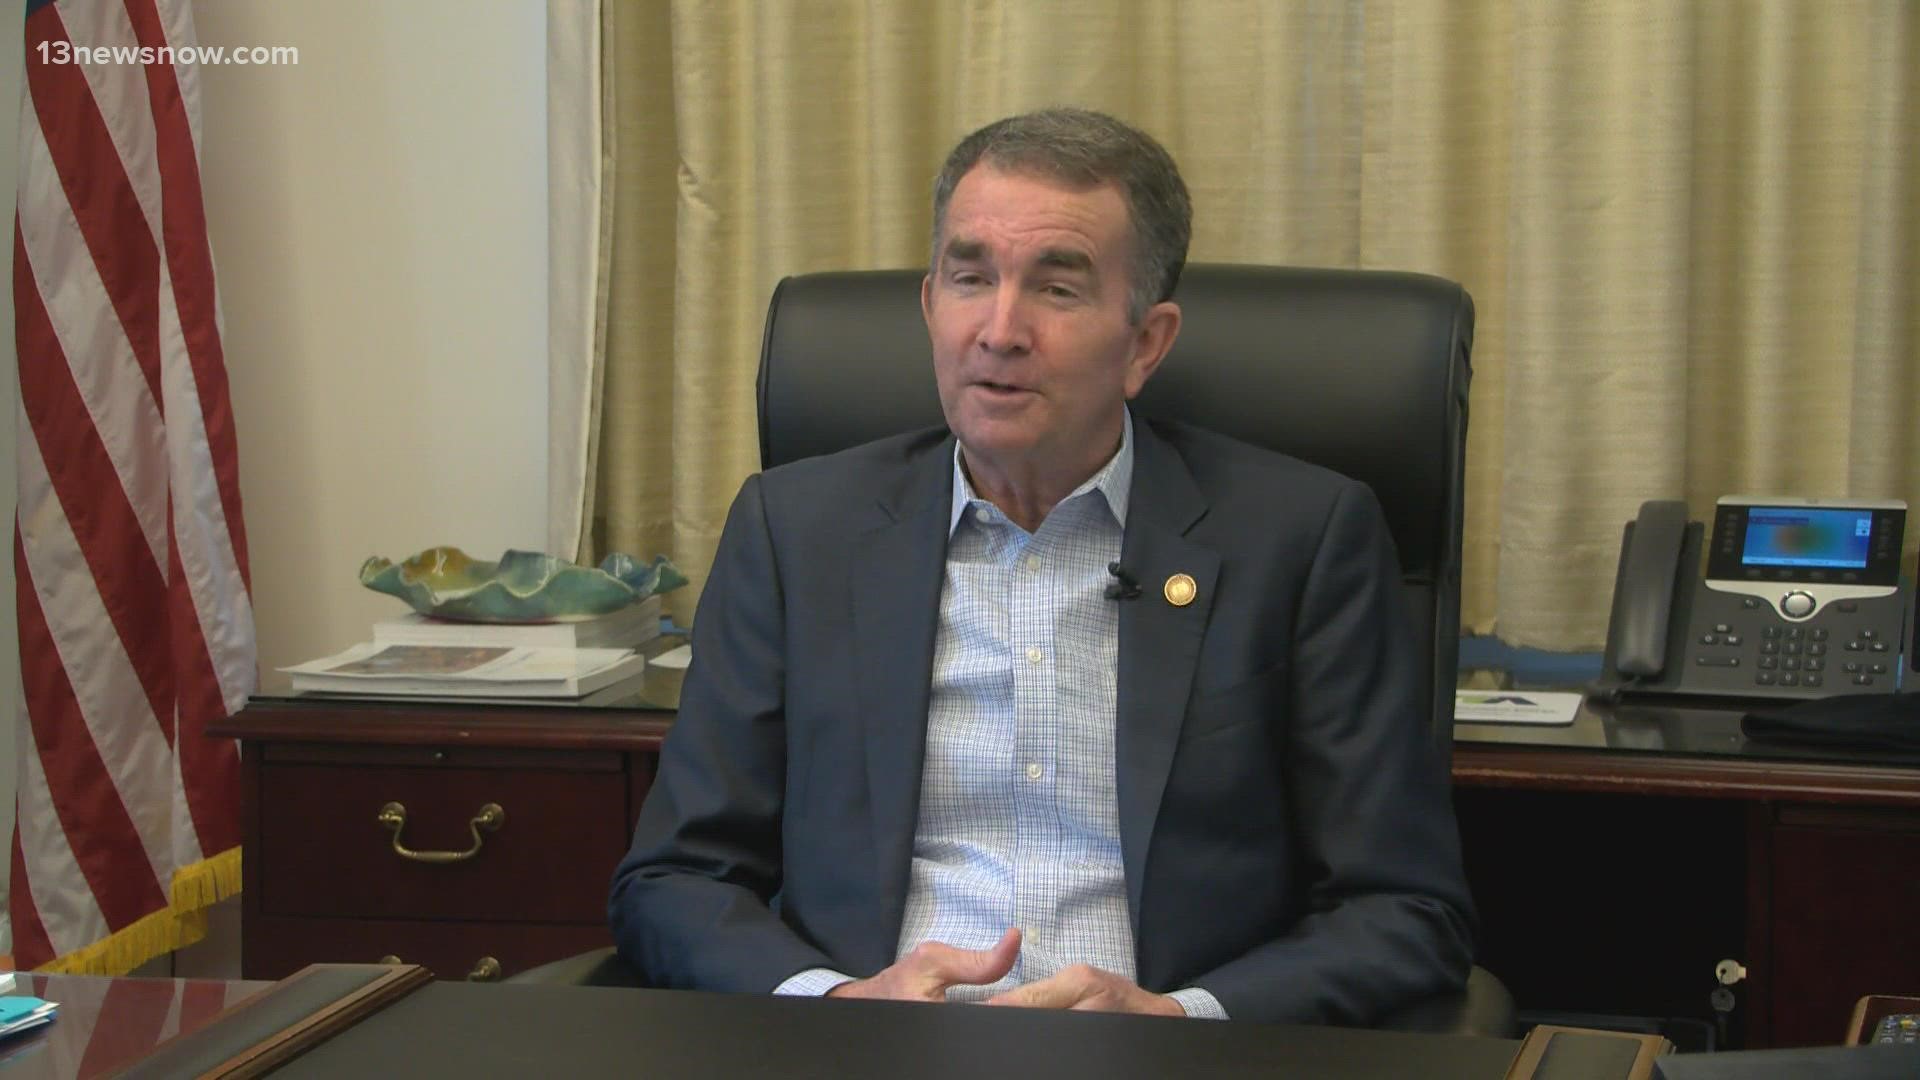 Former Governor Ralph Northam, who is also a doctor, testified on Tuesday. He said he first met AJ Hadsell in 2013 and last treated her in January 2015.